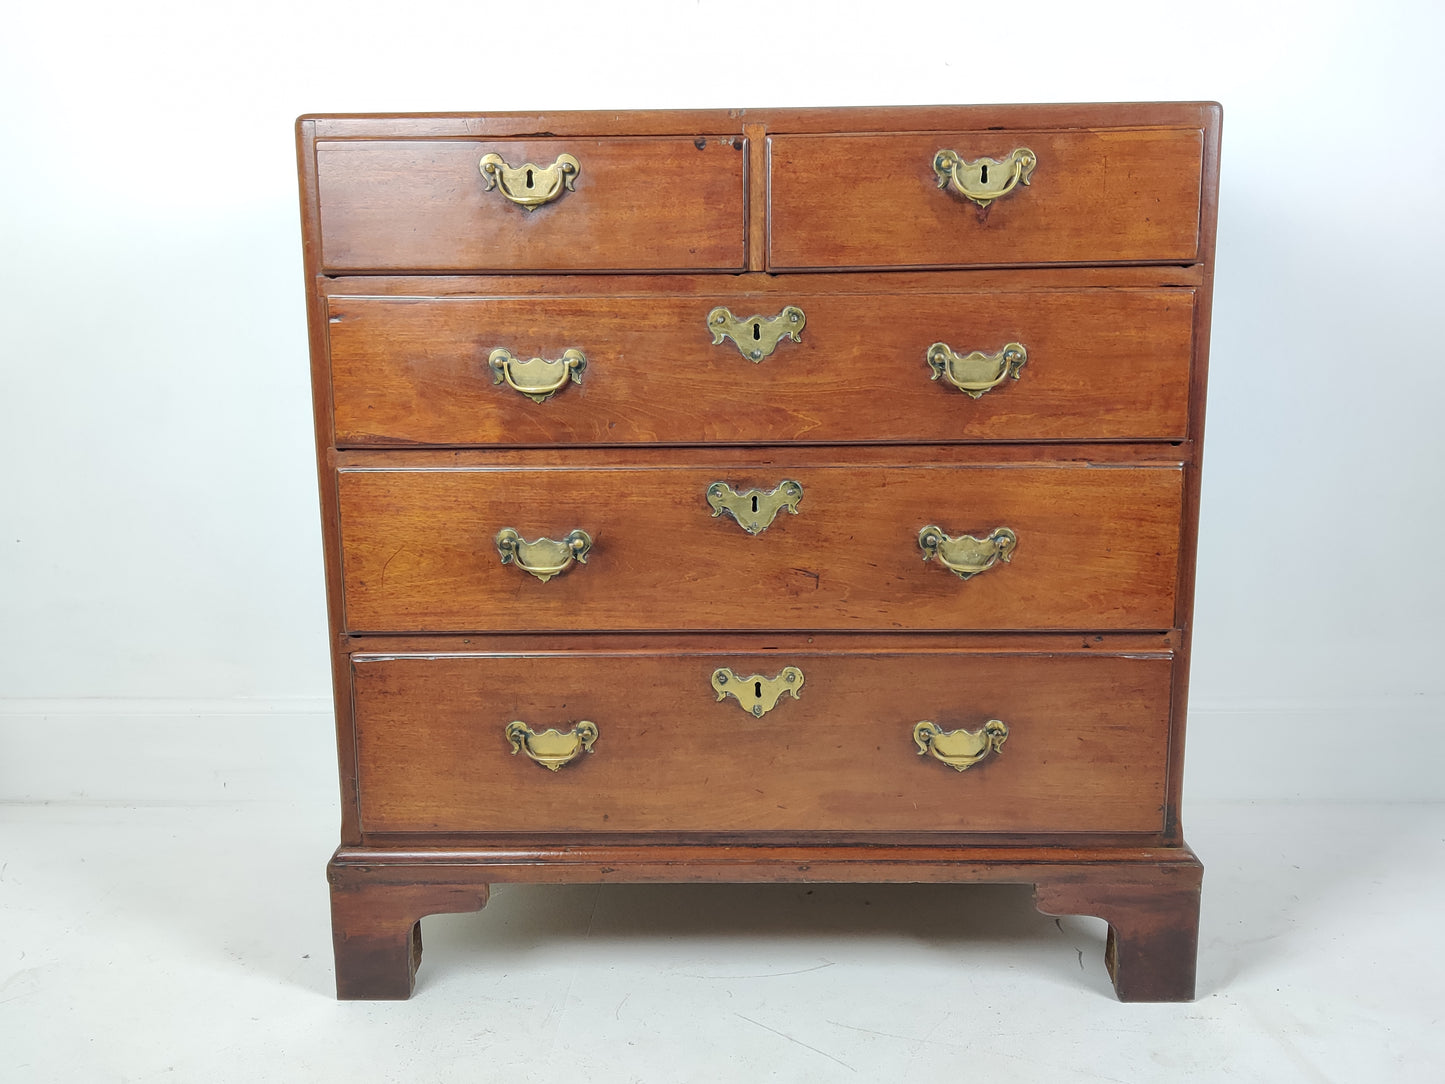 George II chest of drawers